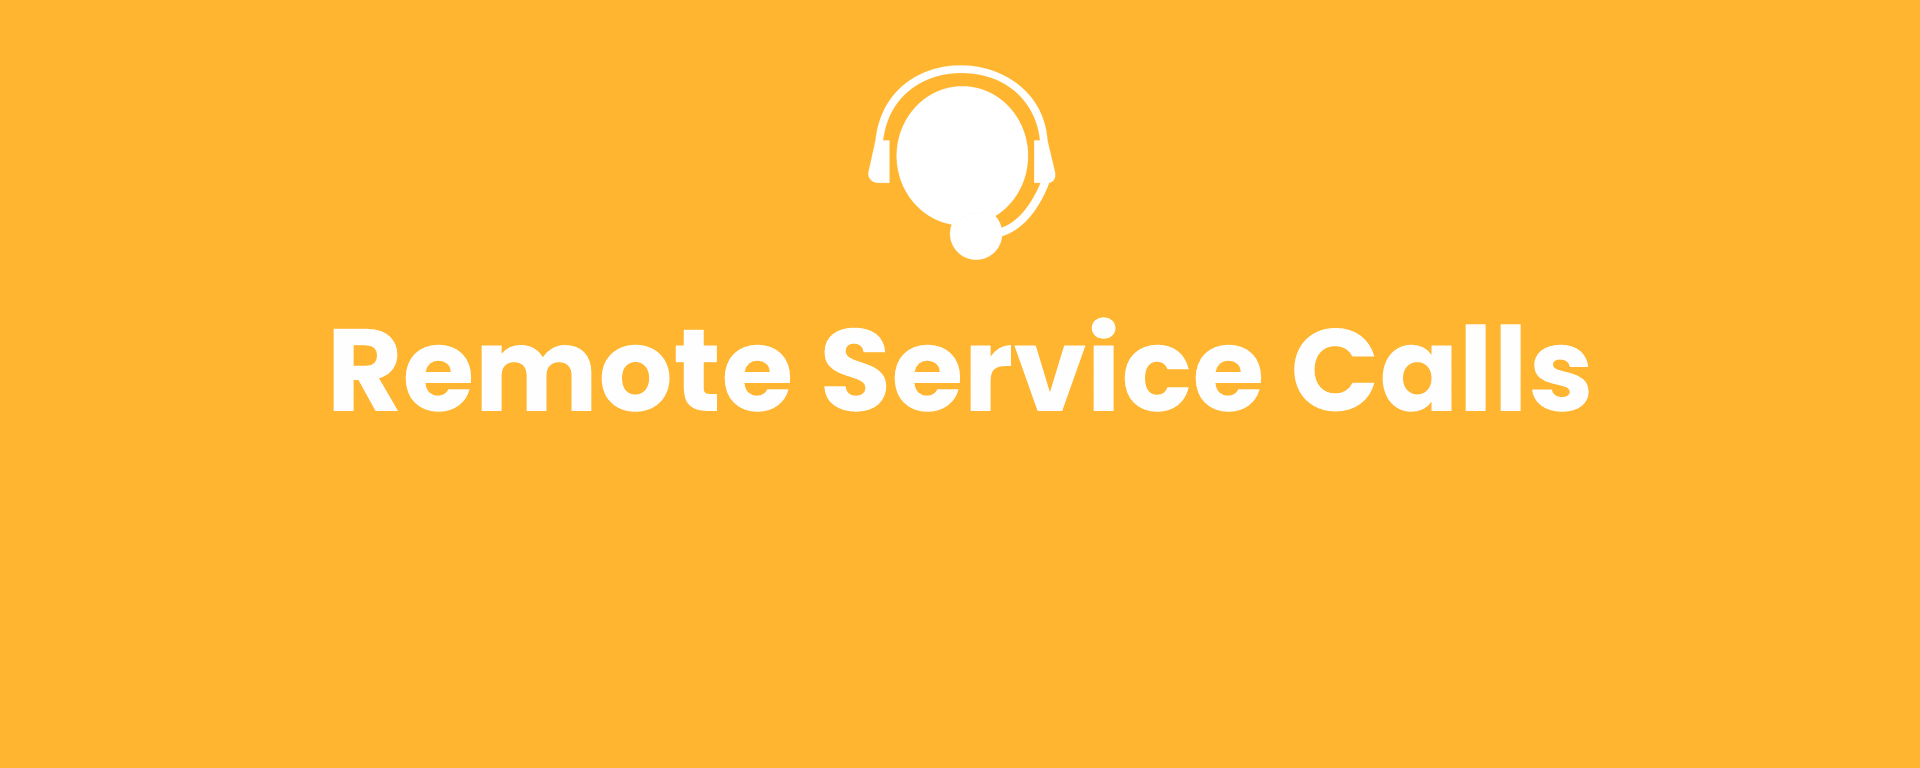 Managing Client Expectations during Remote Service Calls